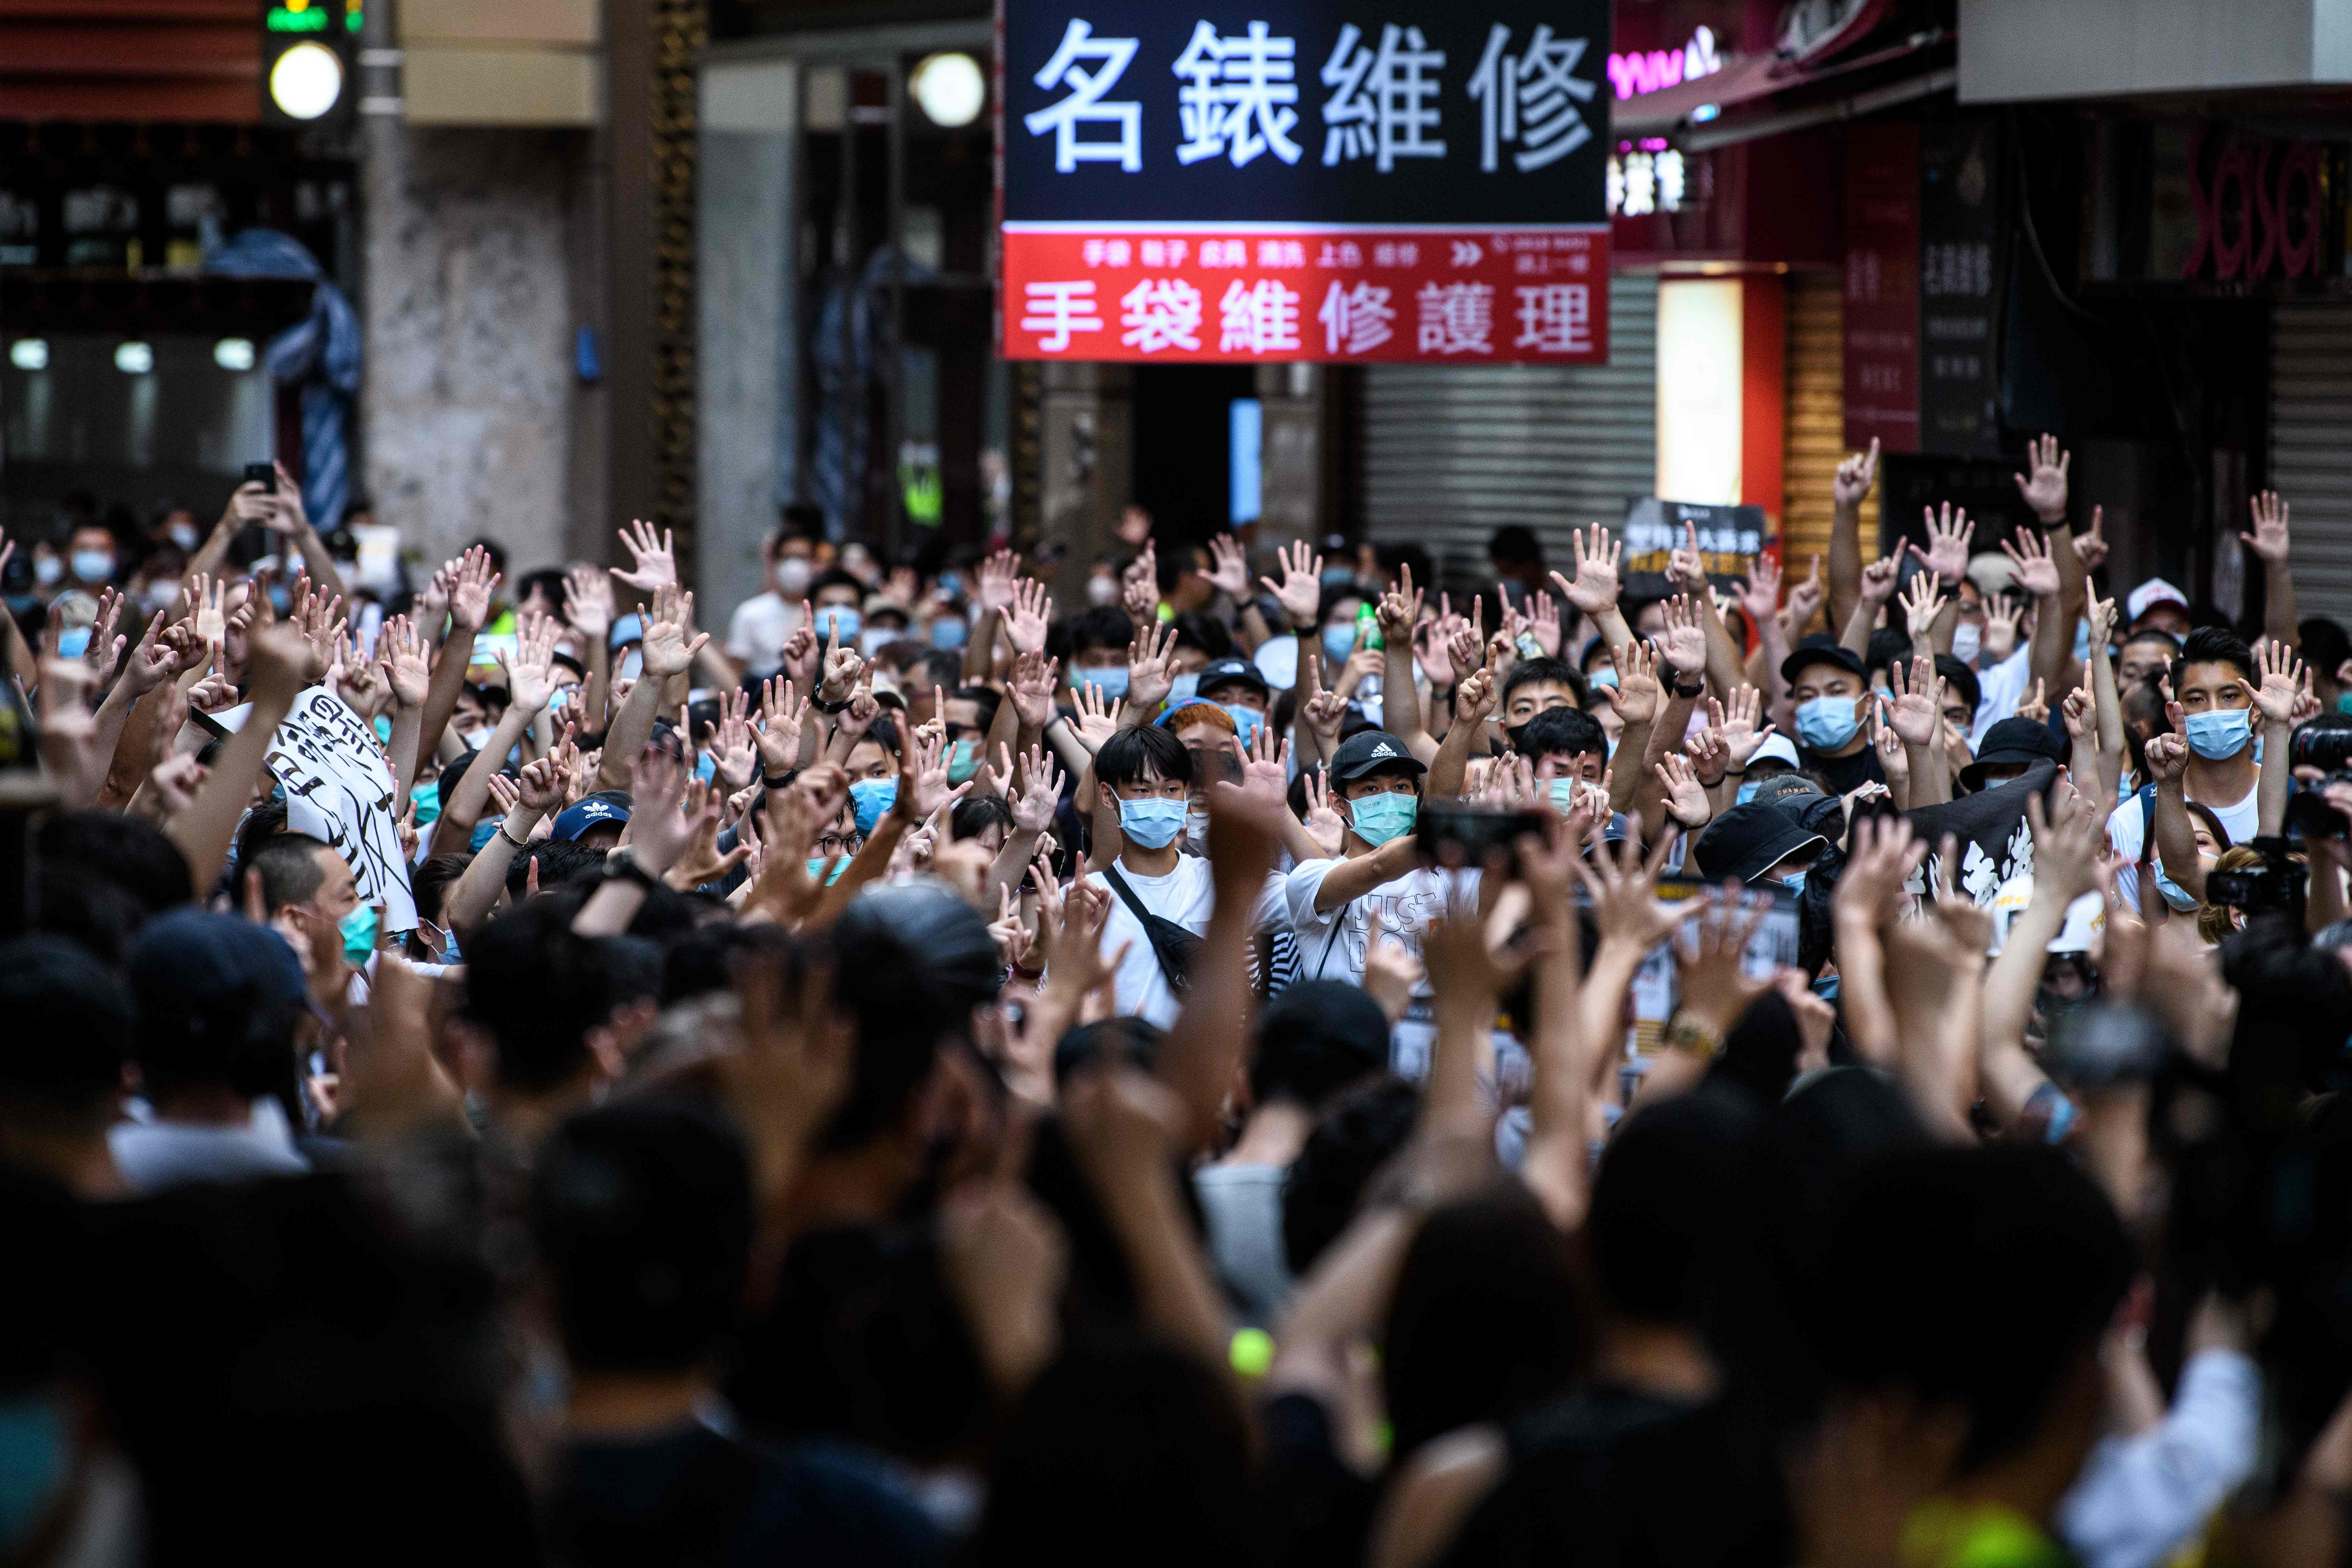 File image: Protesters in Hong Kong chant slogans during a rally against a new national security law in July 2020